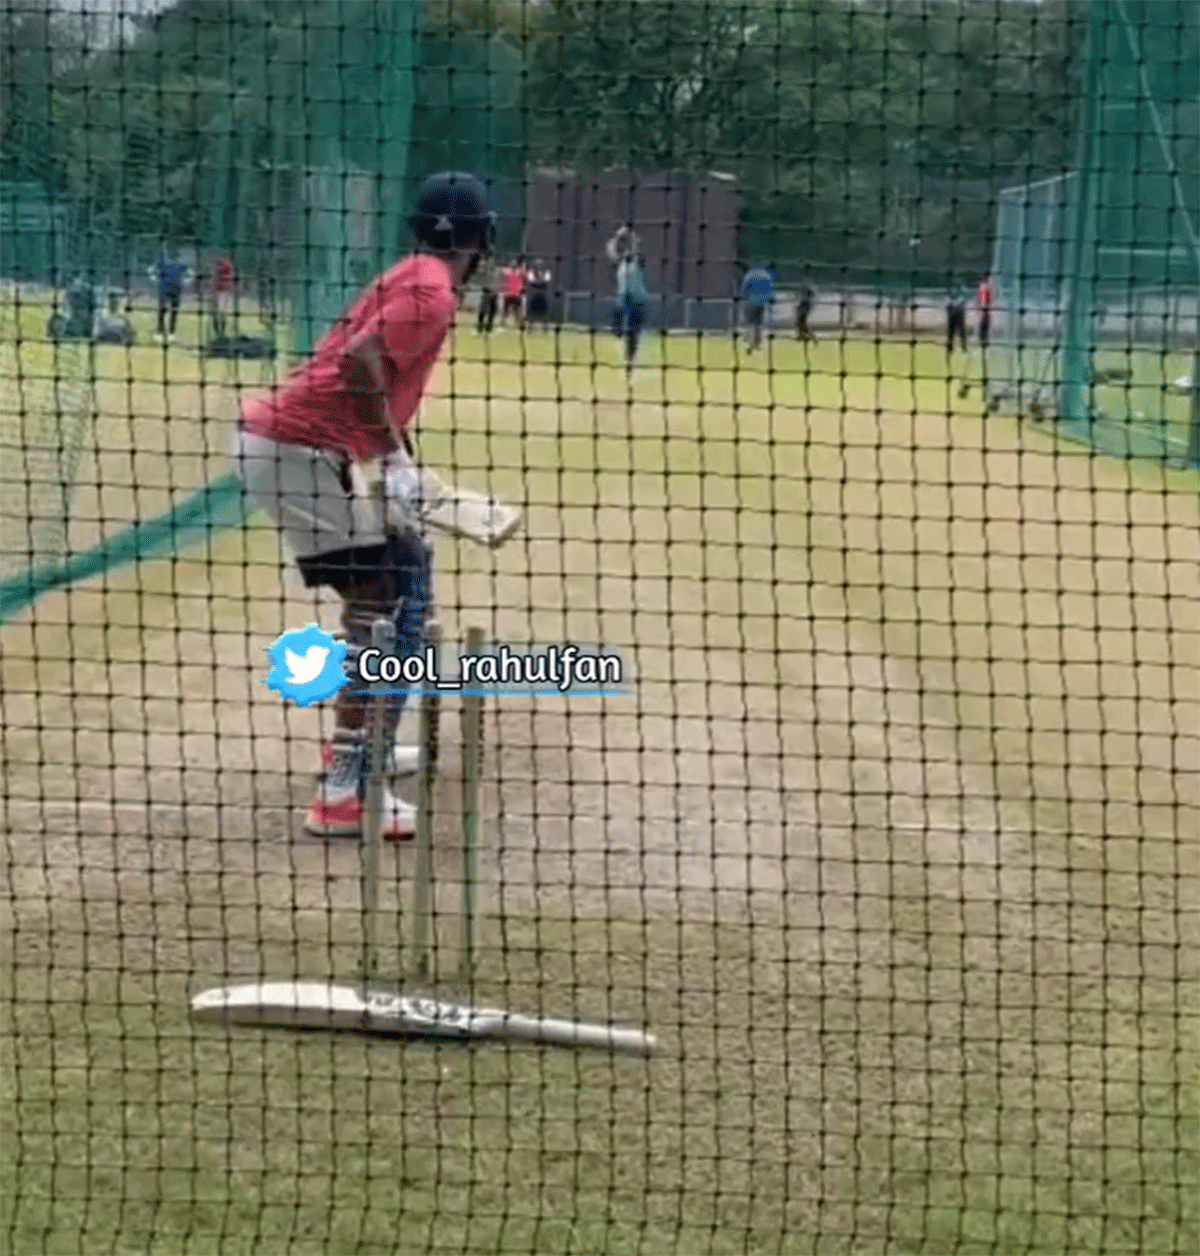 Jhulan Goswami bowls to KL Rahul in the nets